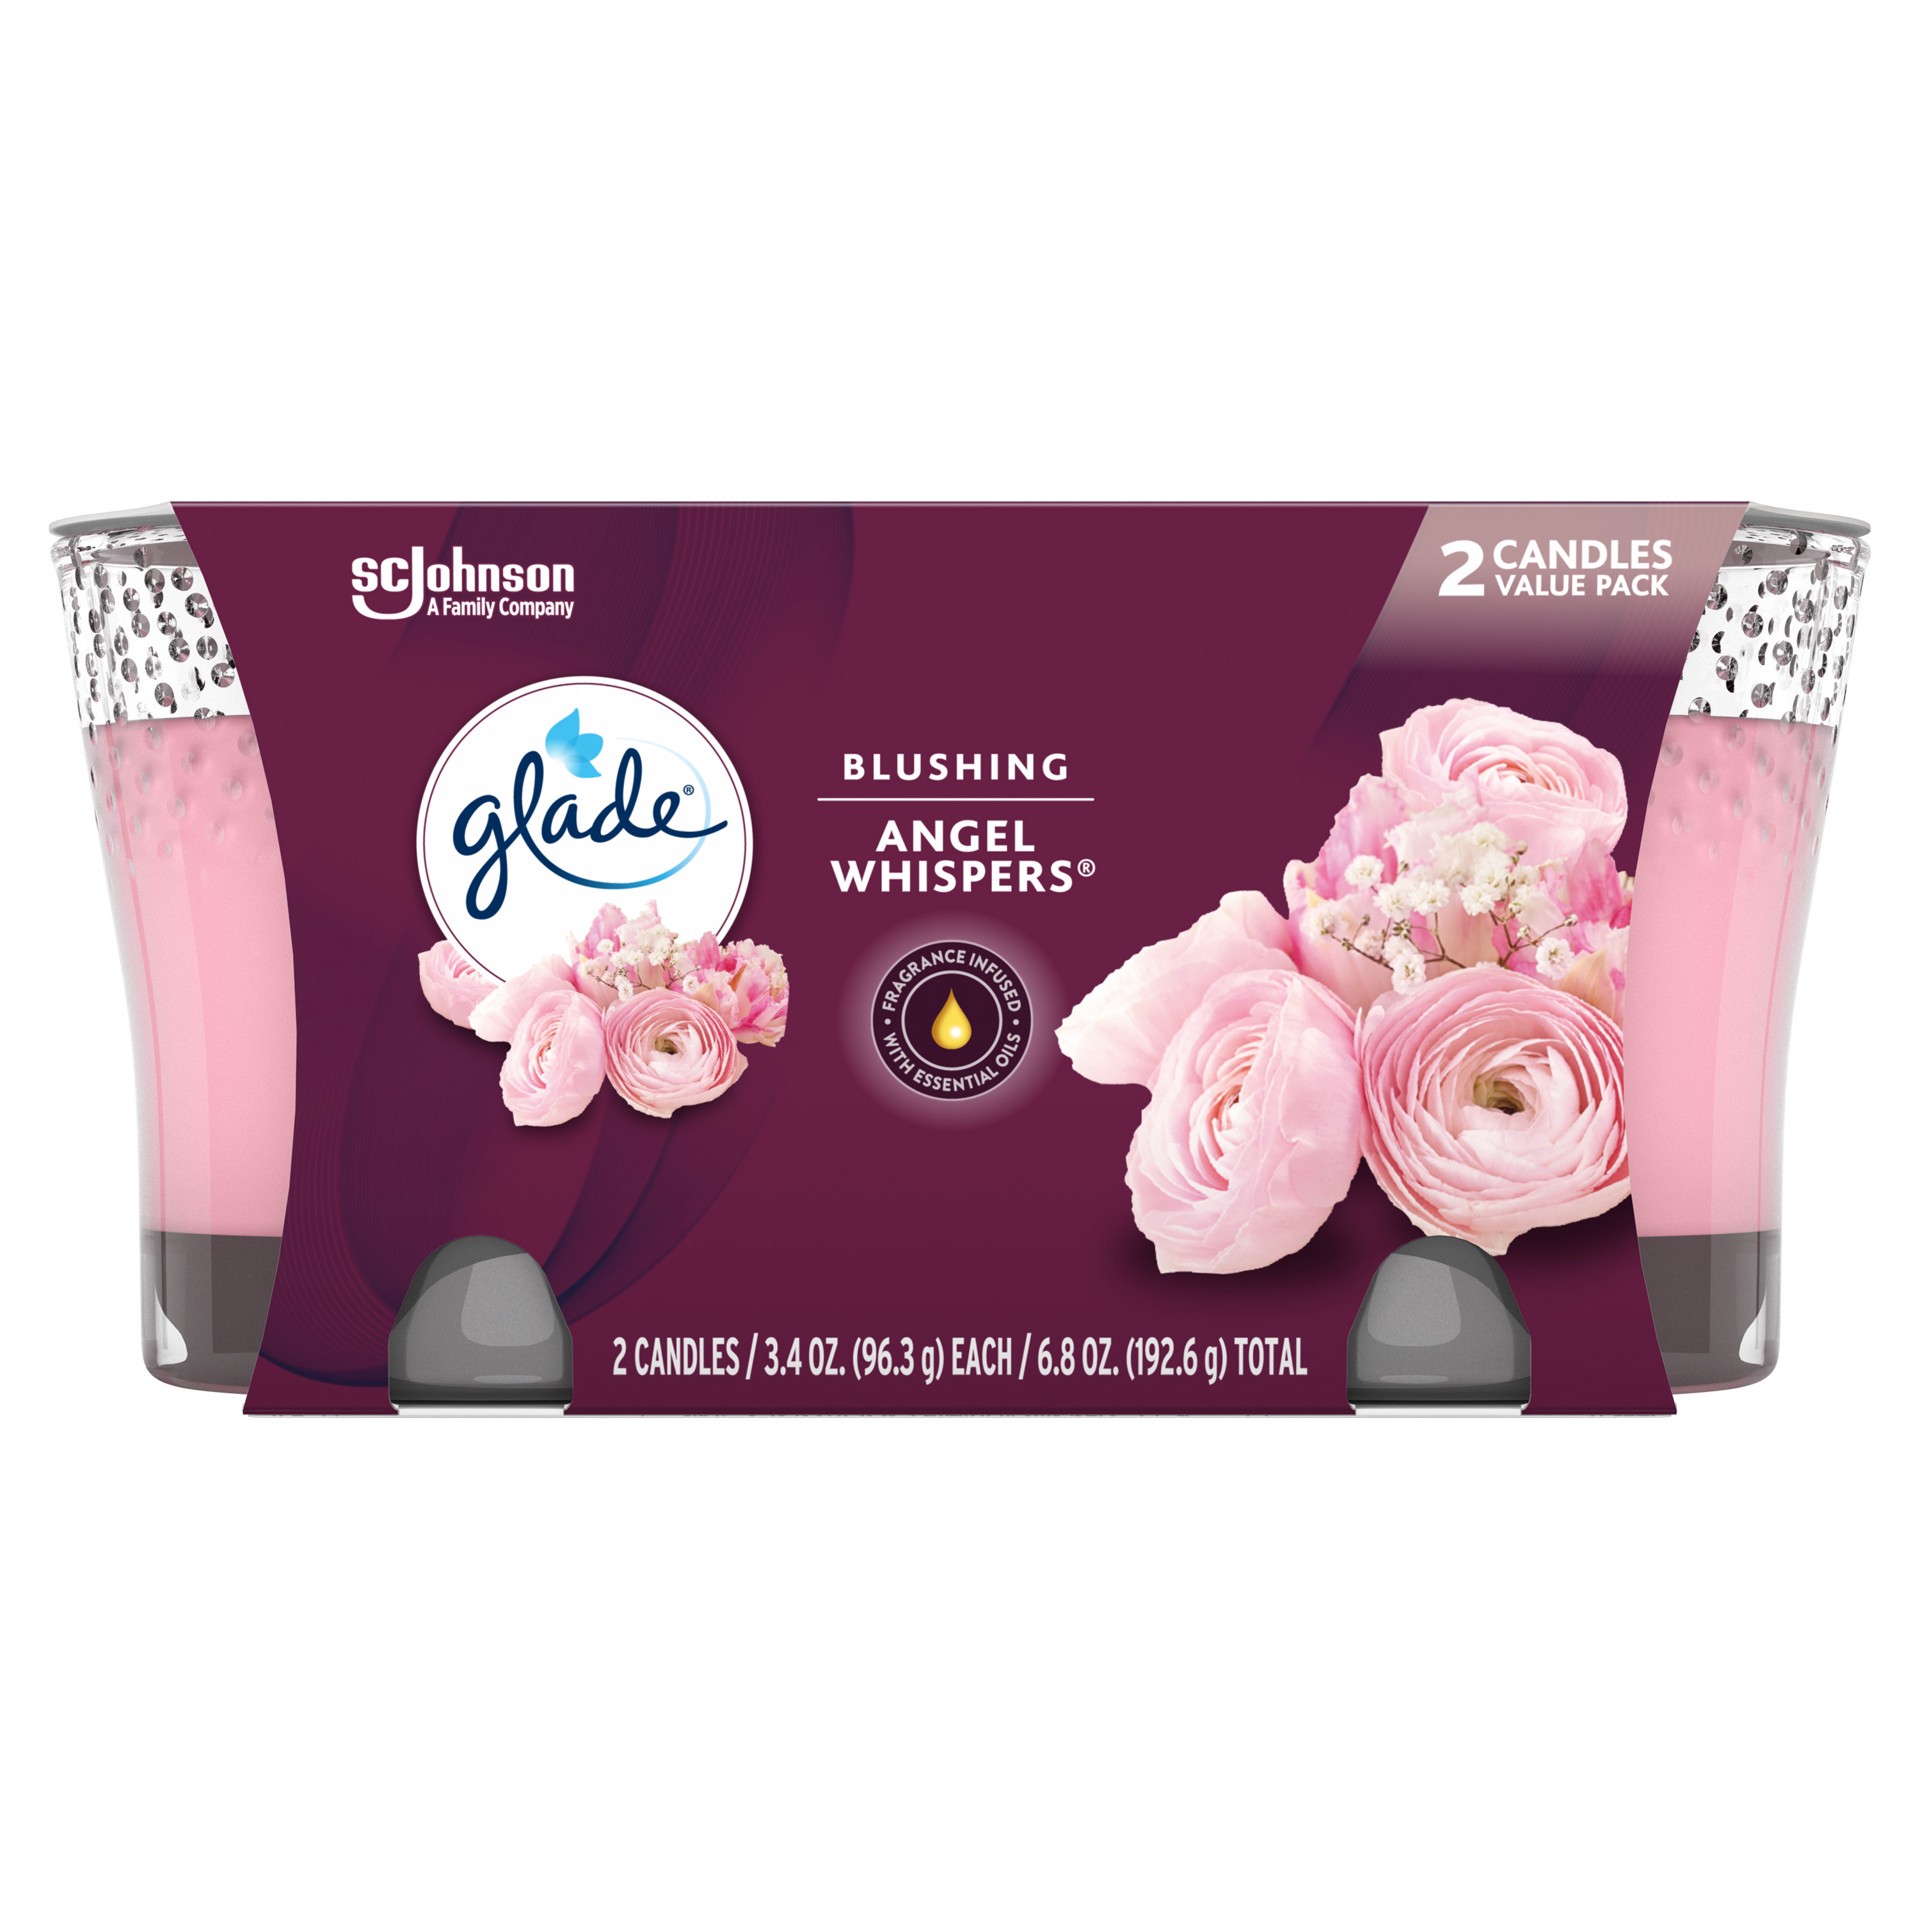 slide 1 of 6, Glade Candle Angel Whispers Scent, 1-Wick, 3.4 oz (96.3 g) Each, 2 Counts, Fragrance Infused with Essential Oils, Notes of Bulgarian Rose, Peach, White Floral Bouquet, Lead-Free Wick Scented Candles, 2 ct; 3.4 oz